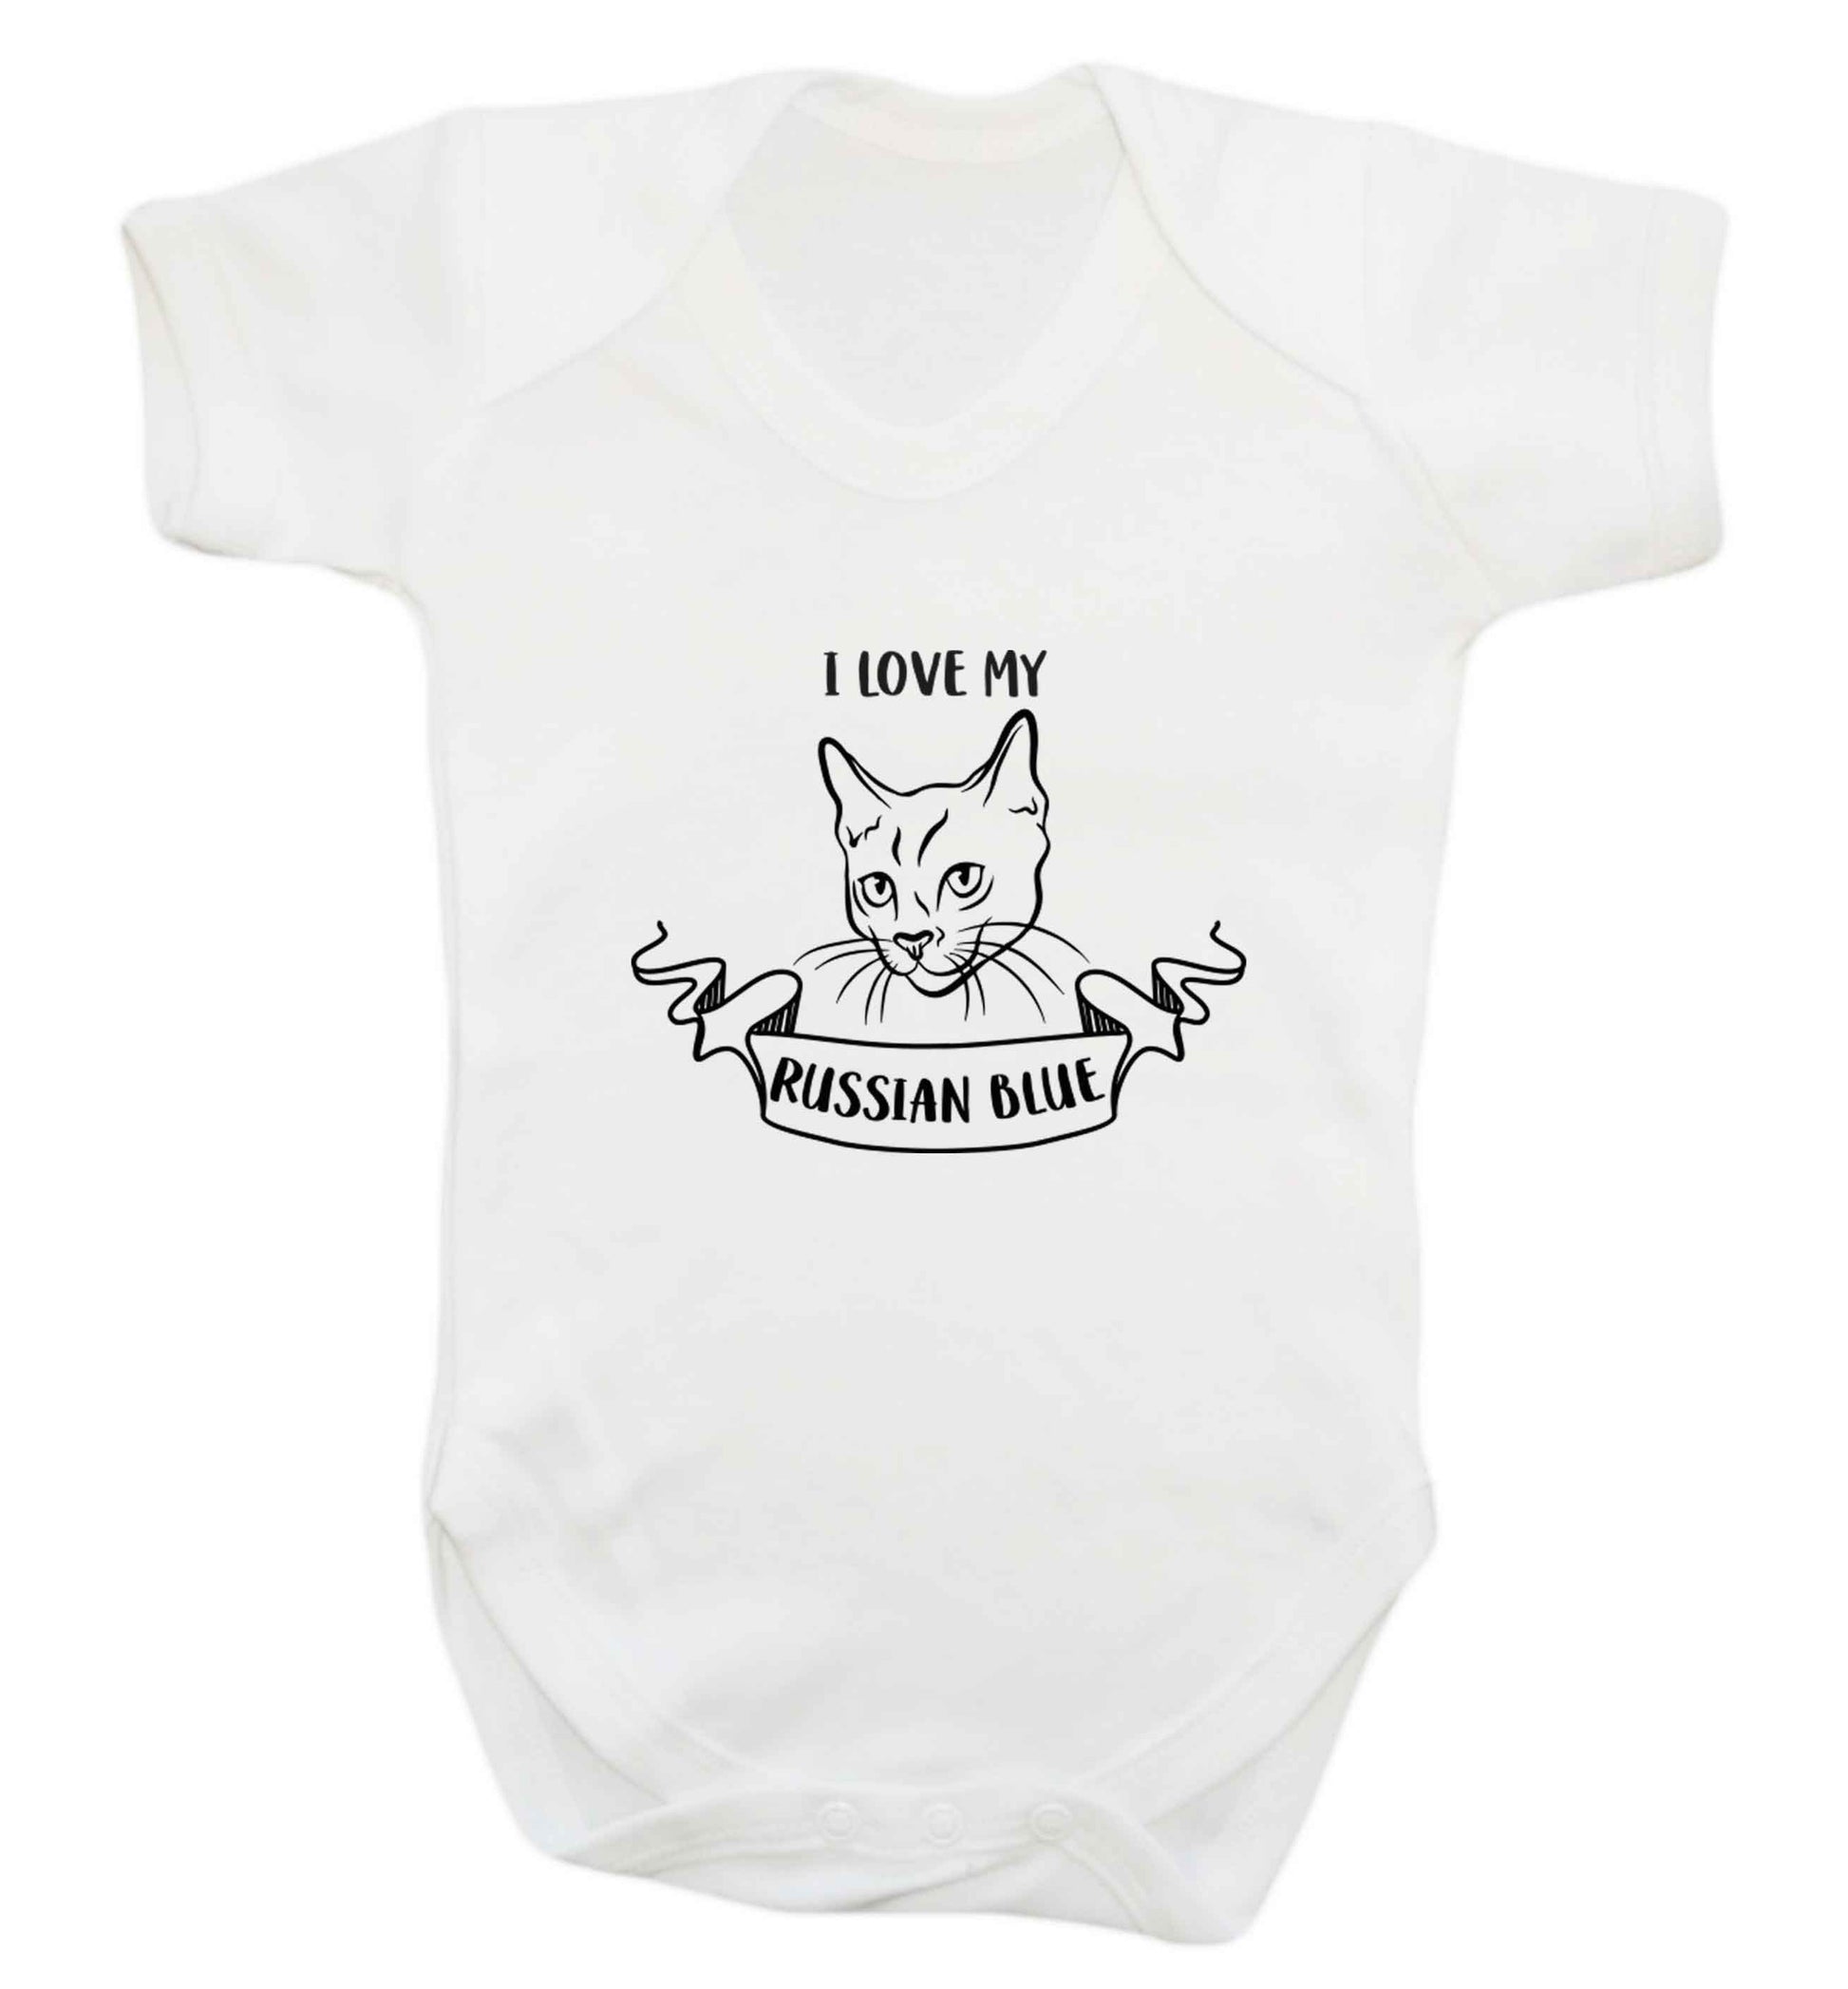 I love my russian blue baby vest white 18-24 months